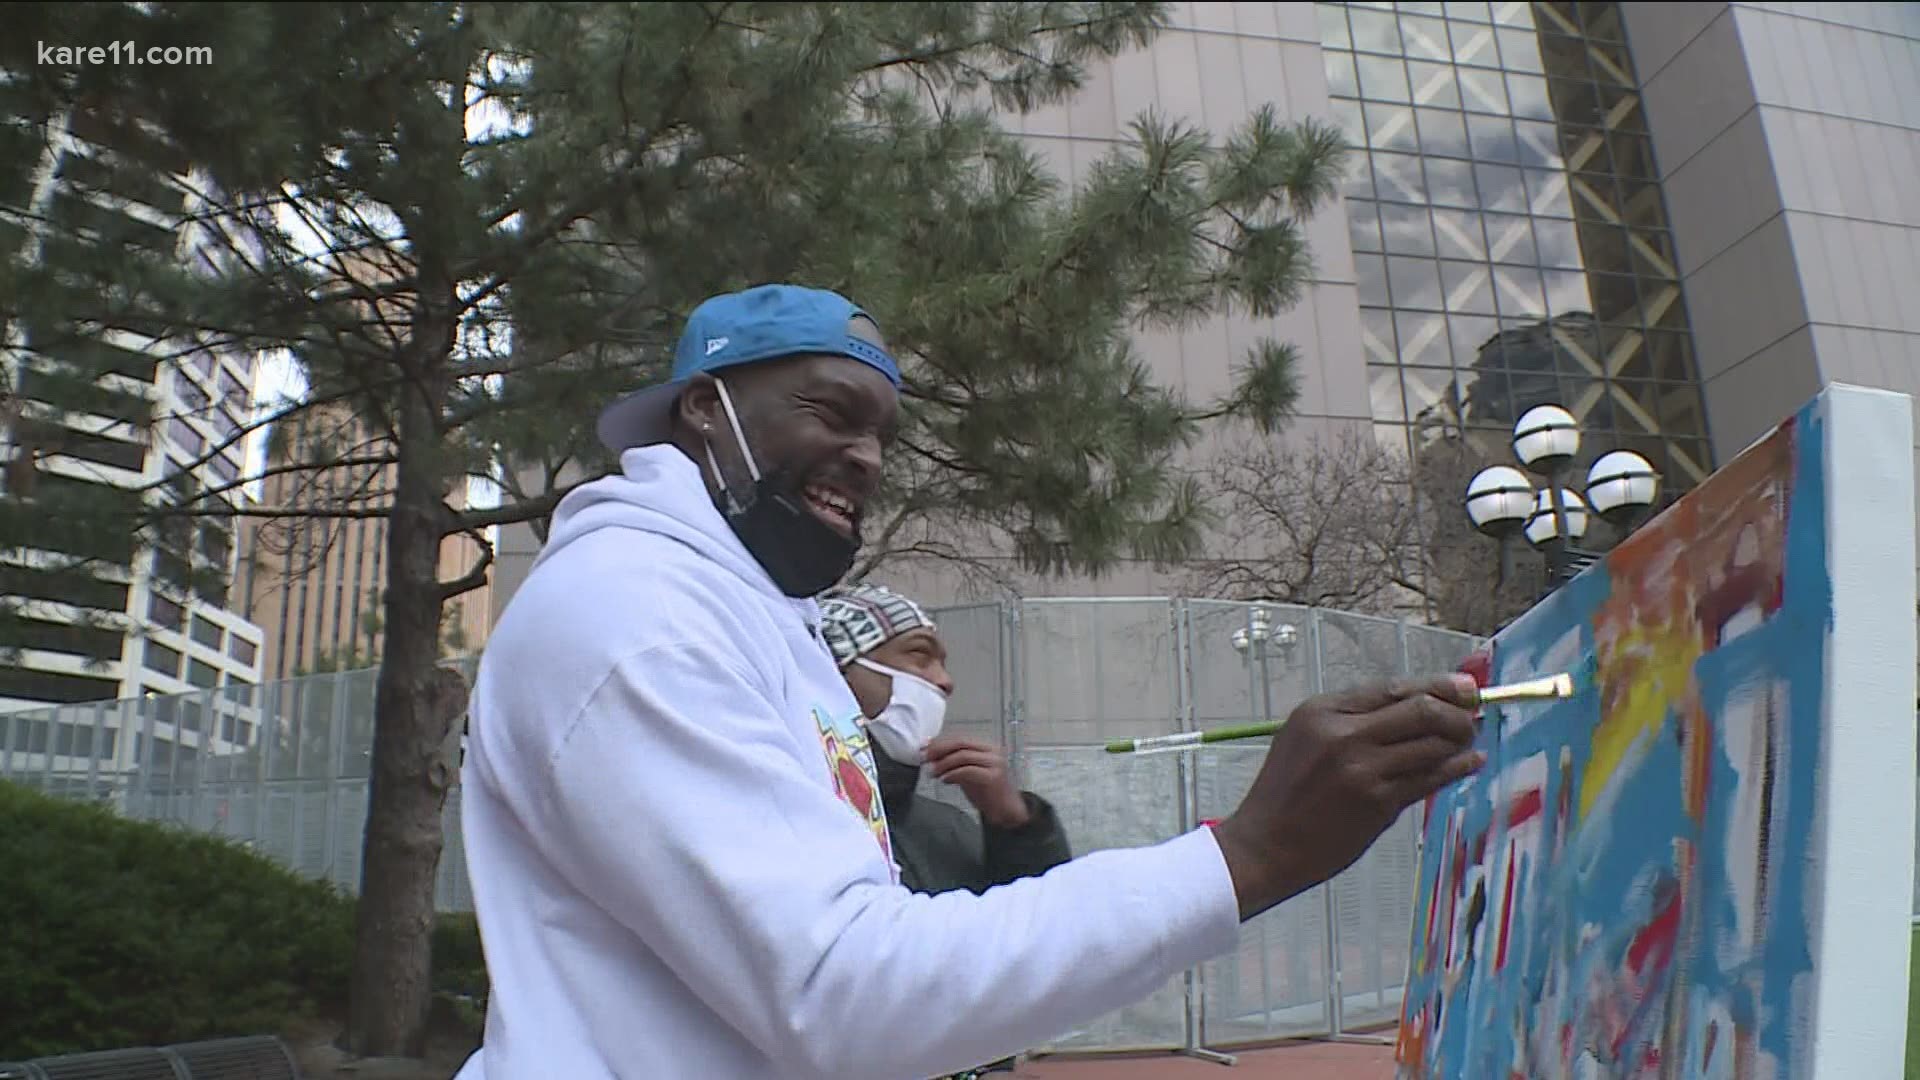 Black artist, Sean Garrison, painted a piece of art outside the courthouse during Tuesday's Derek Chauvin verdict.